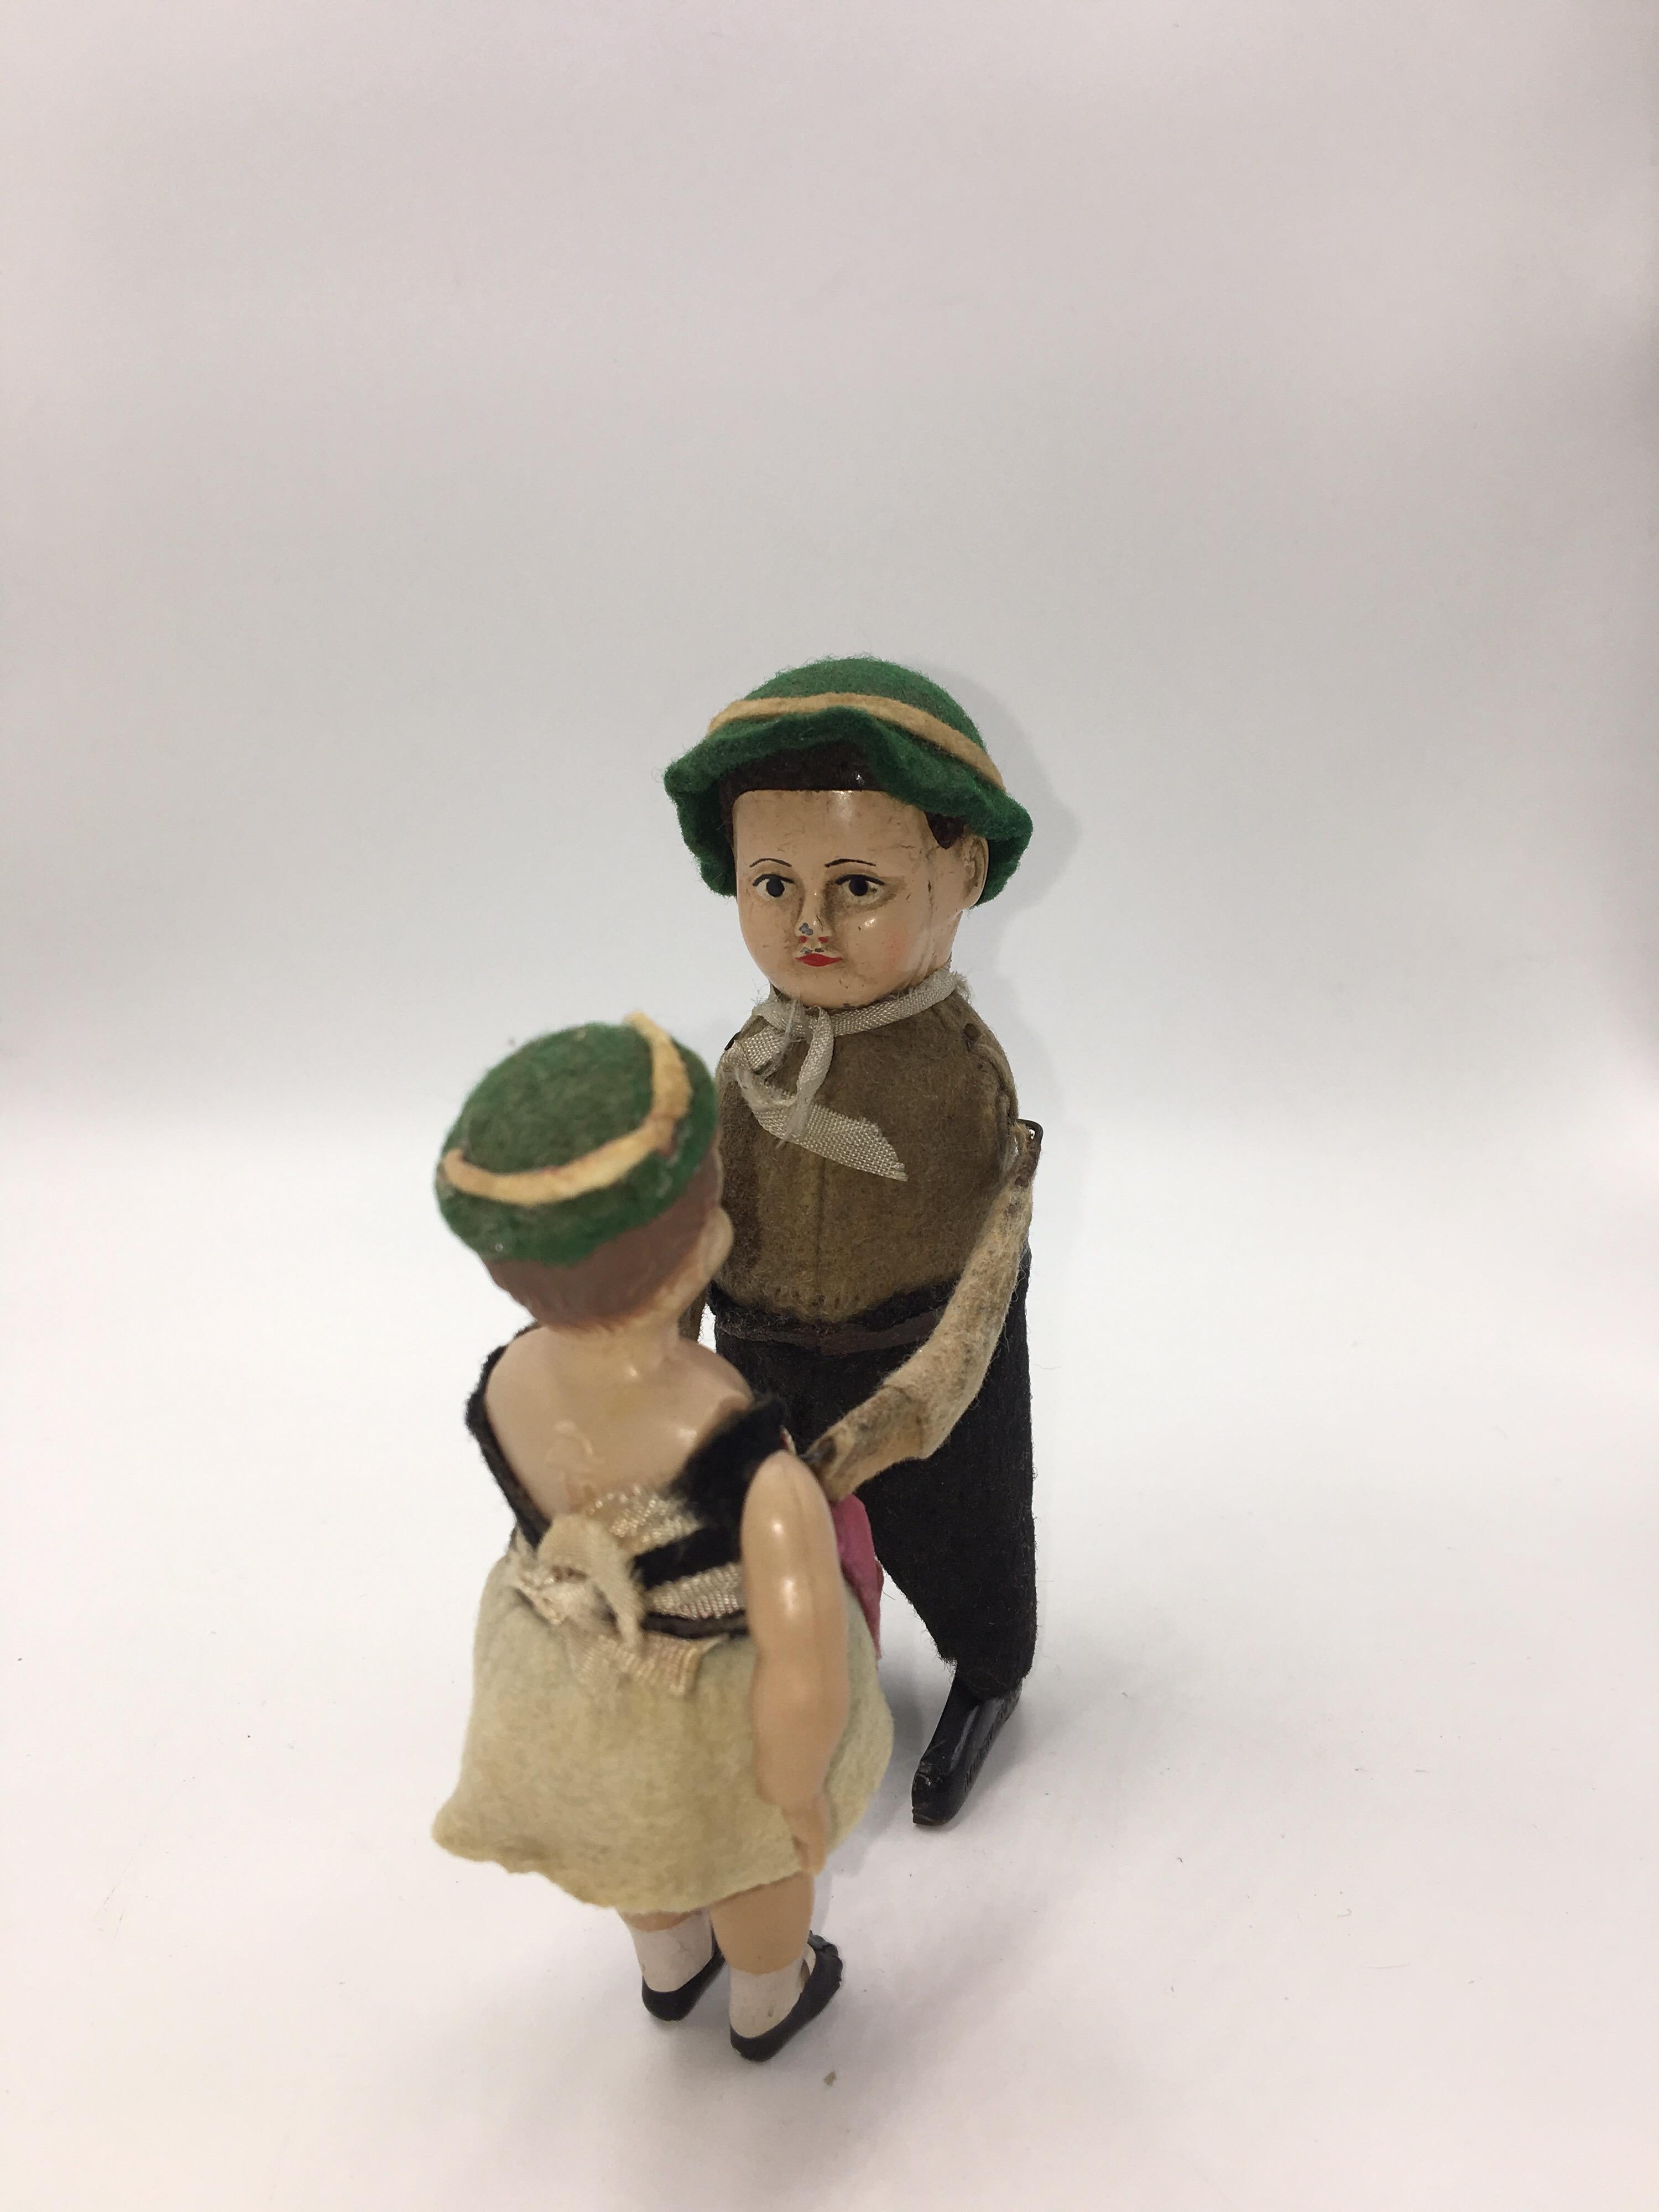 Vintage Schuco Wind Up Toy - Dancing German Couple, circa 1930
Made in Germany